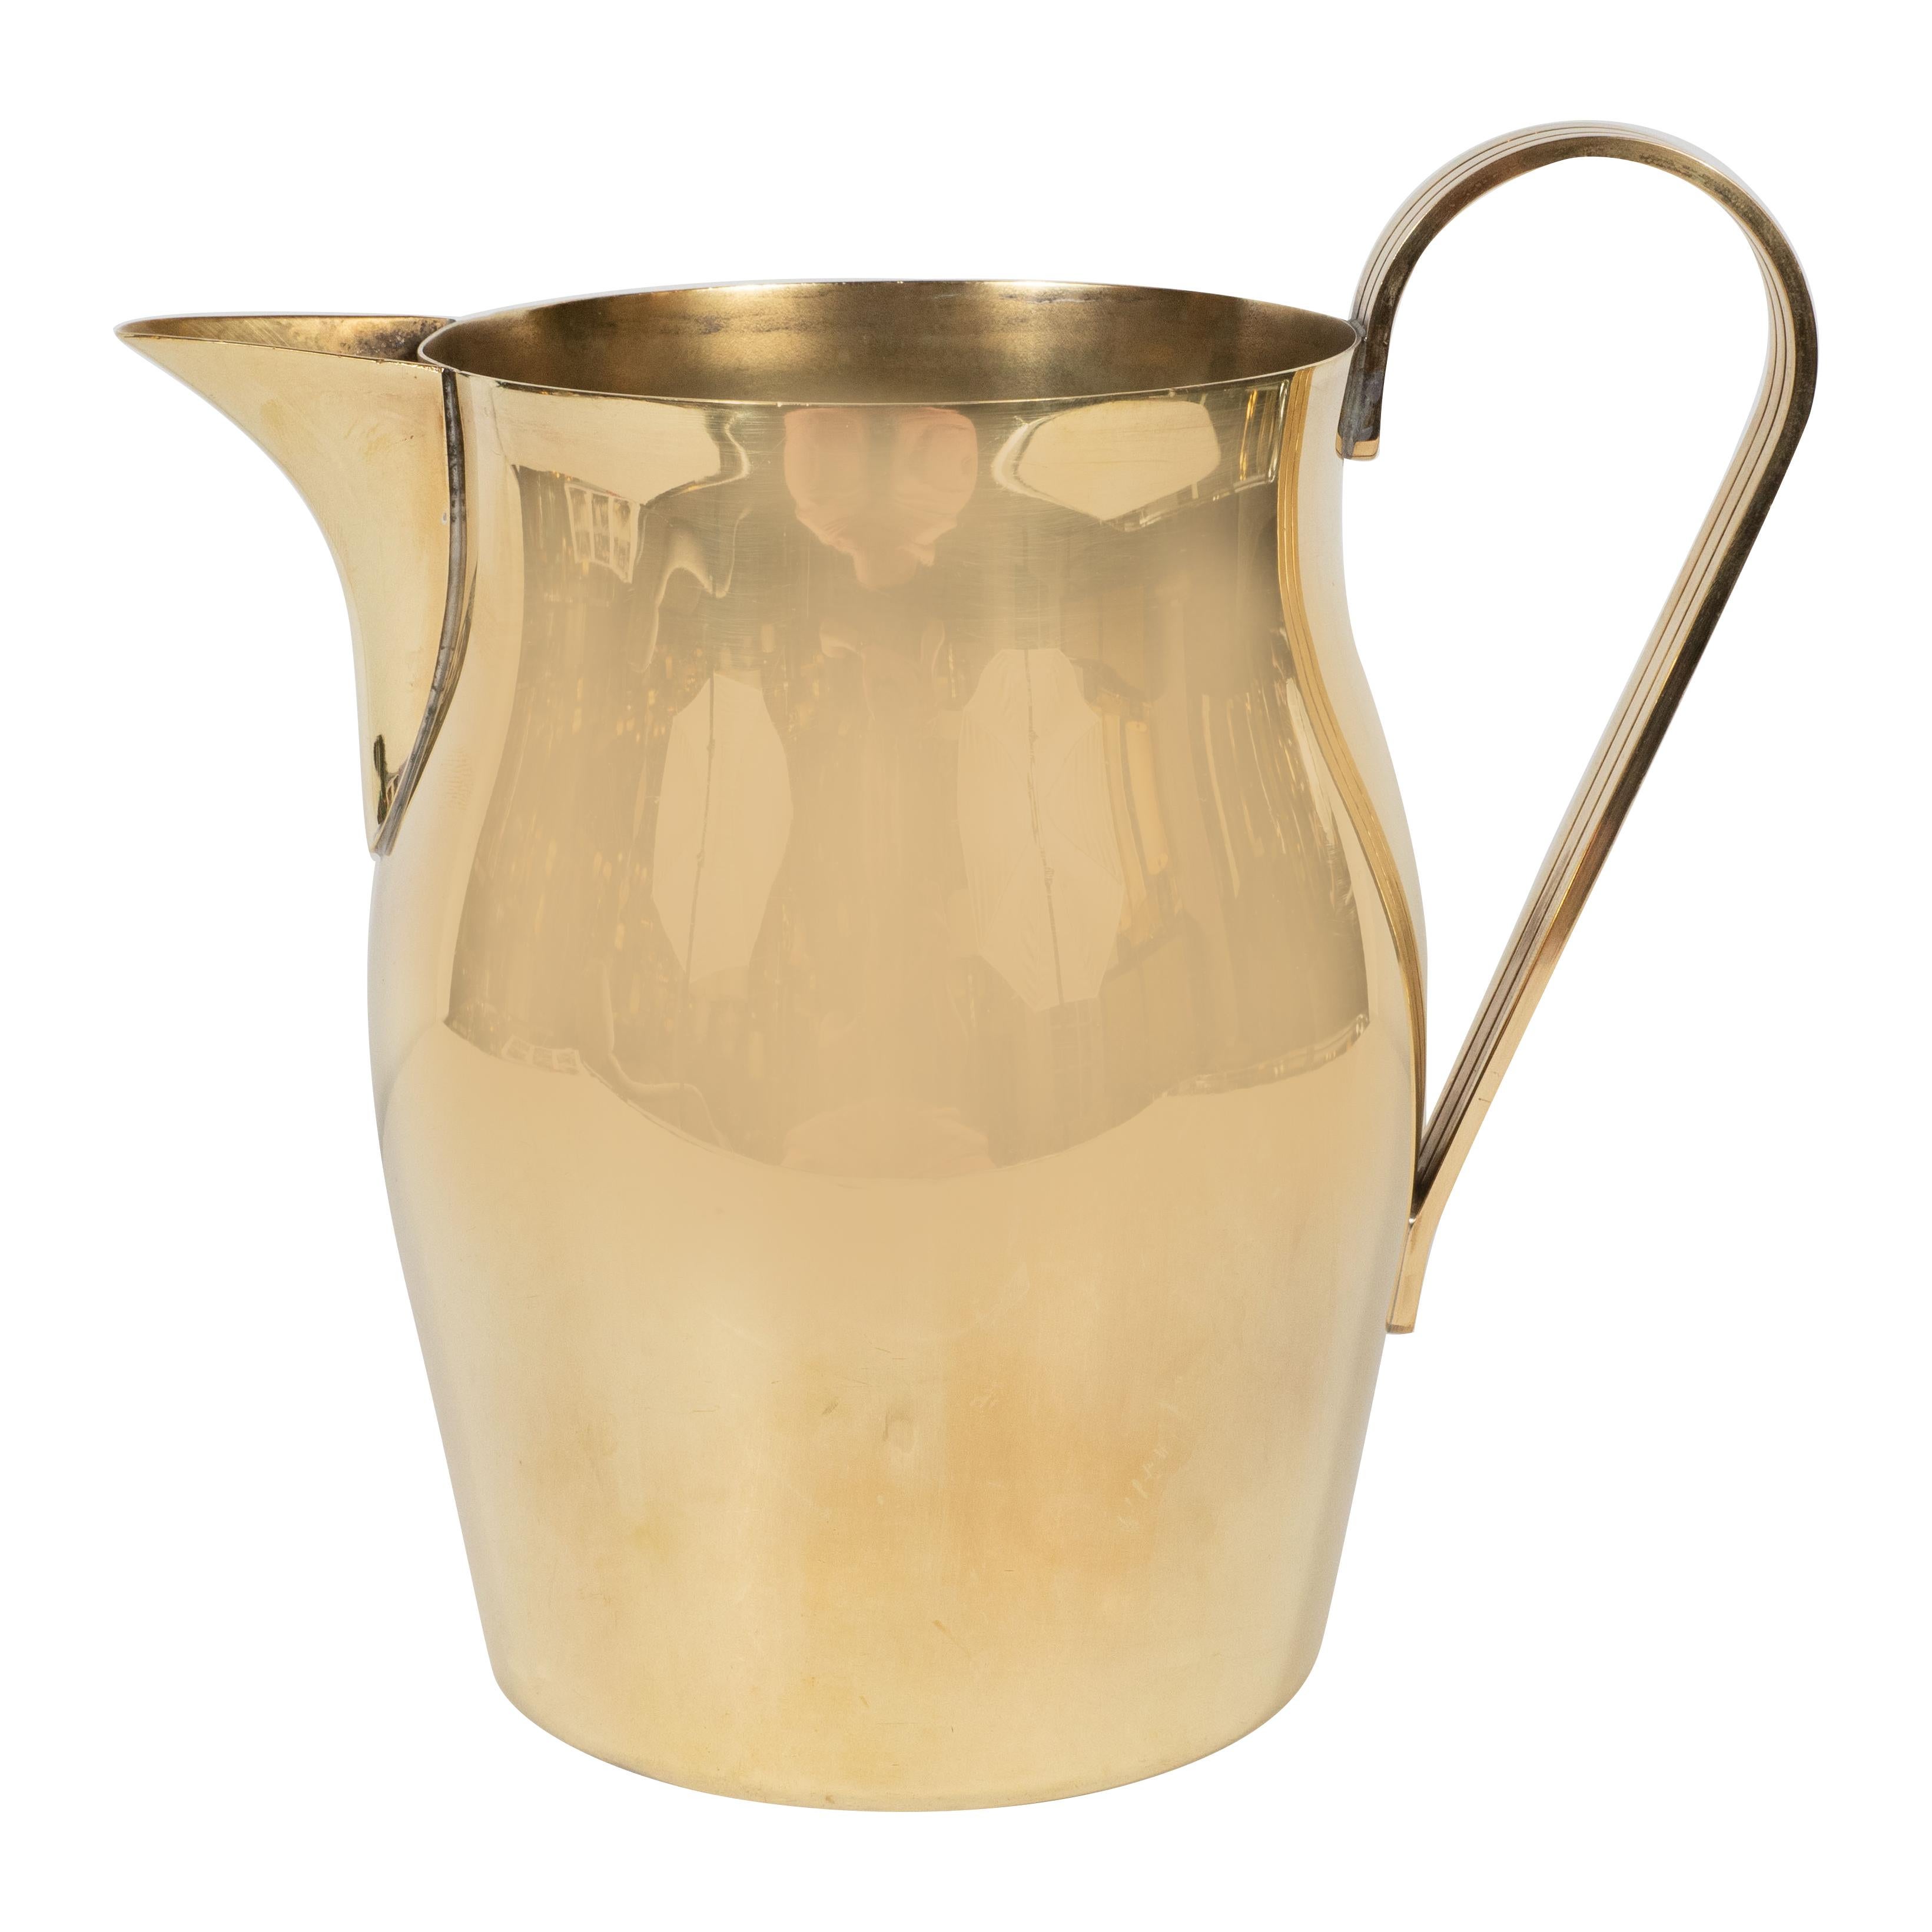 This elegant Mid-Century Modern pitcher was realized by the celebrated 20th century designer Tommi Parzinger, circa 1950. It features a undulating cylindrical body, a streamlined and striated handle with two engraved lines in the center and peaked